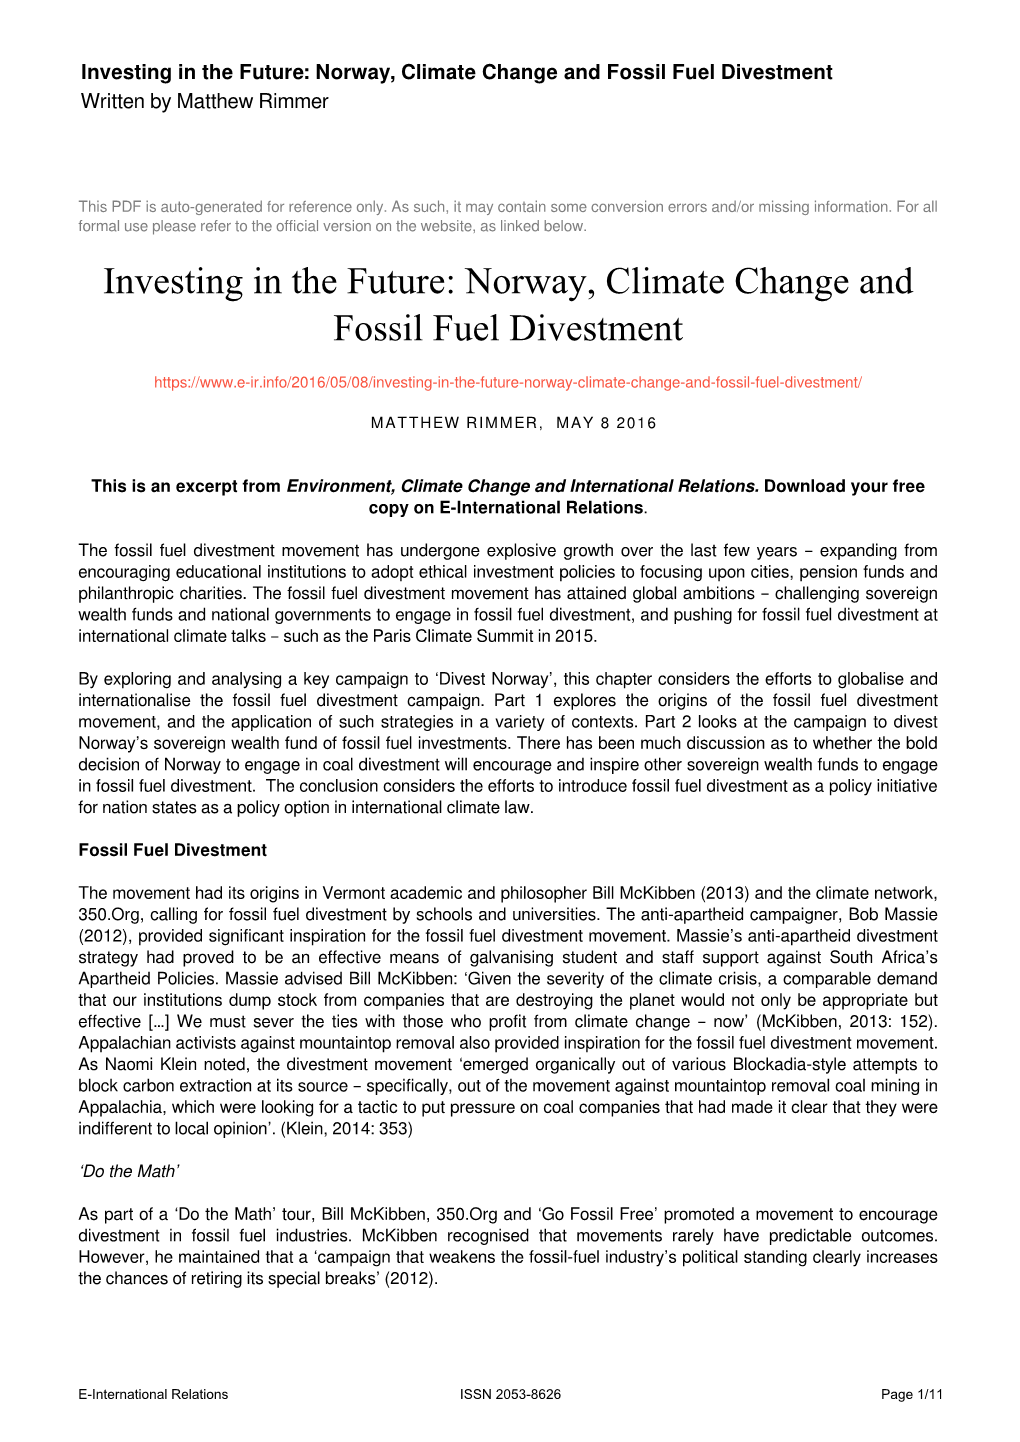 Norway, Climate Change and Fossil Fuel Divestment Written by Matthew Rimmer